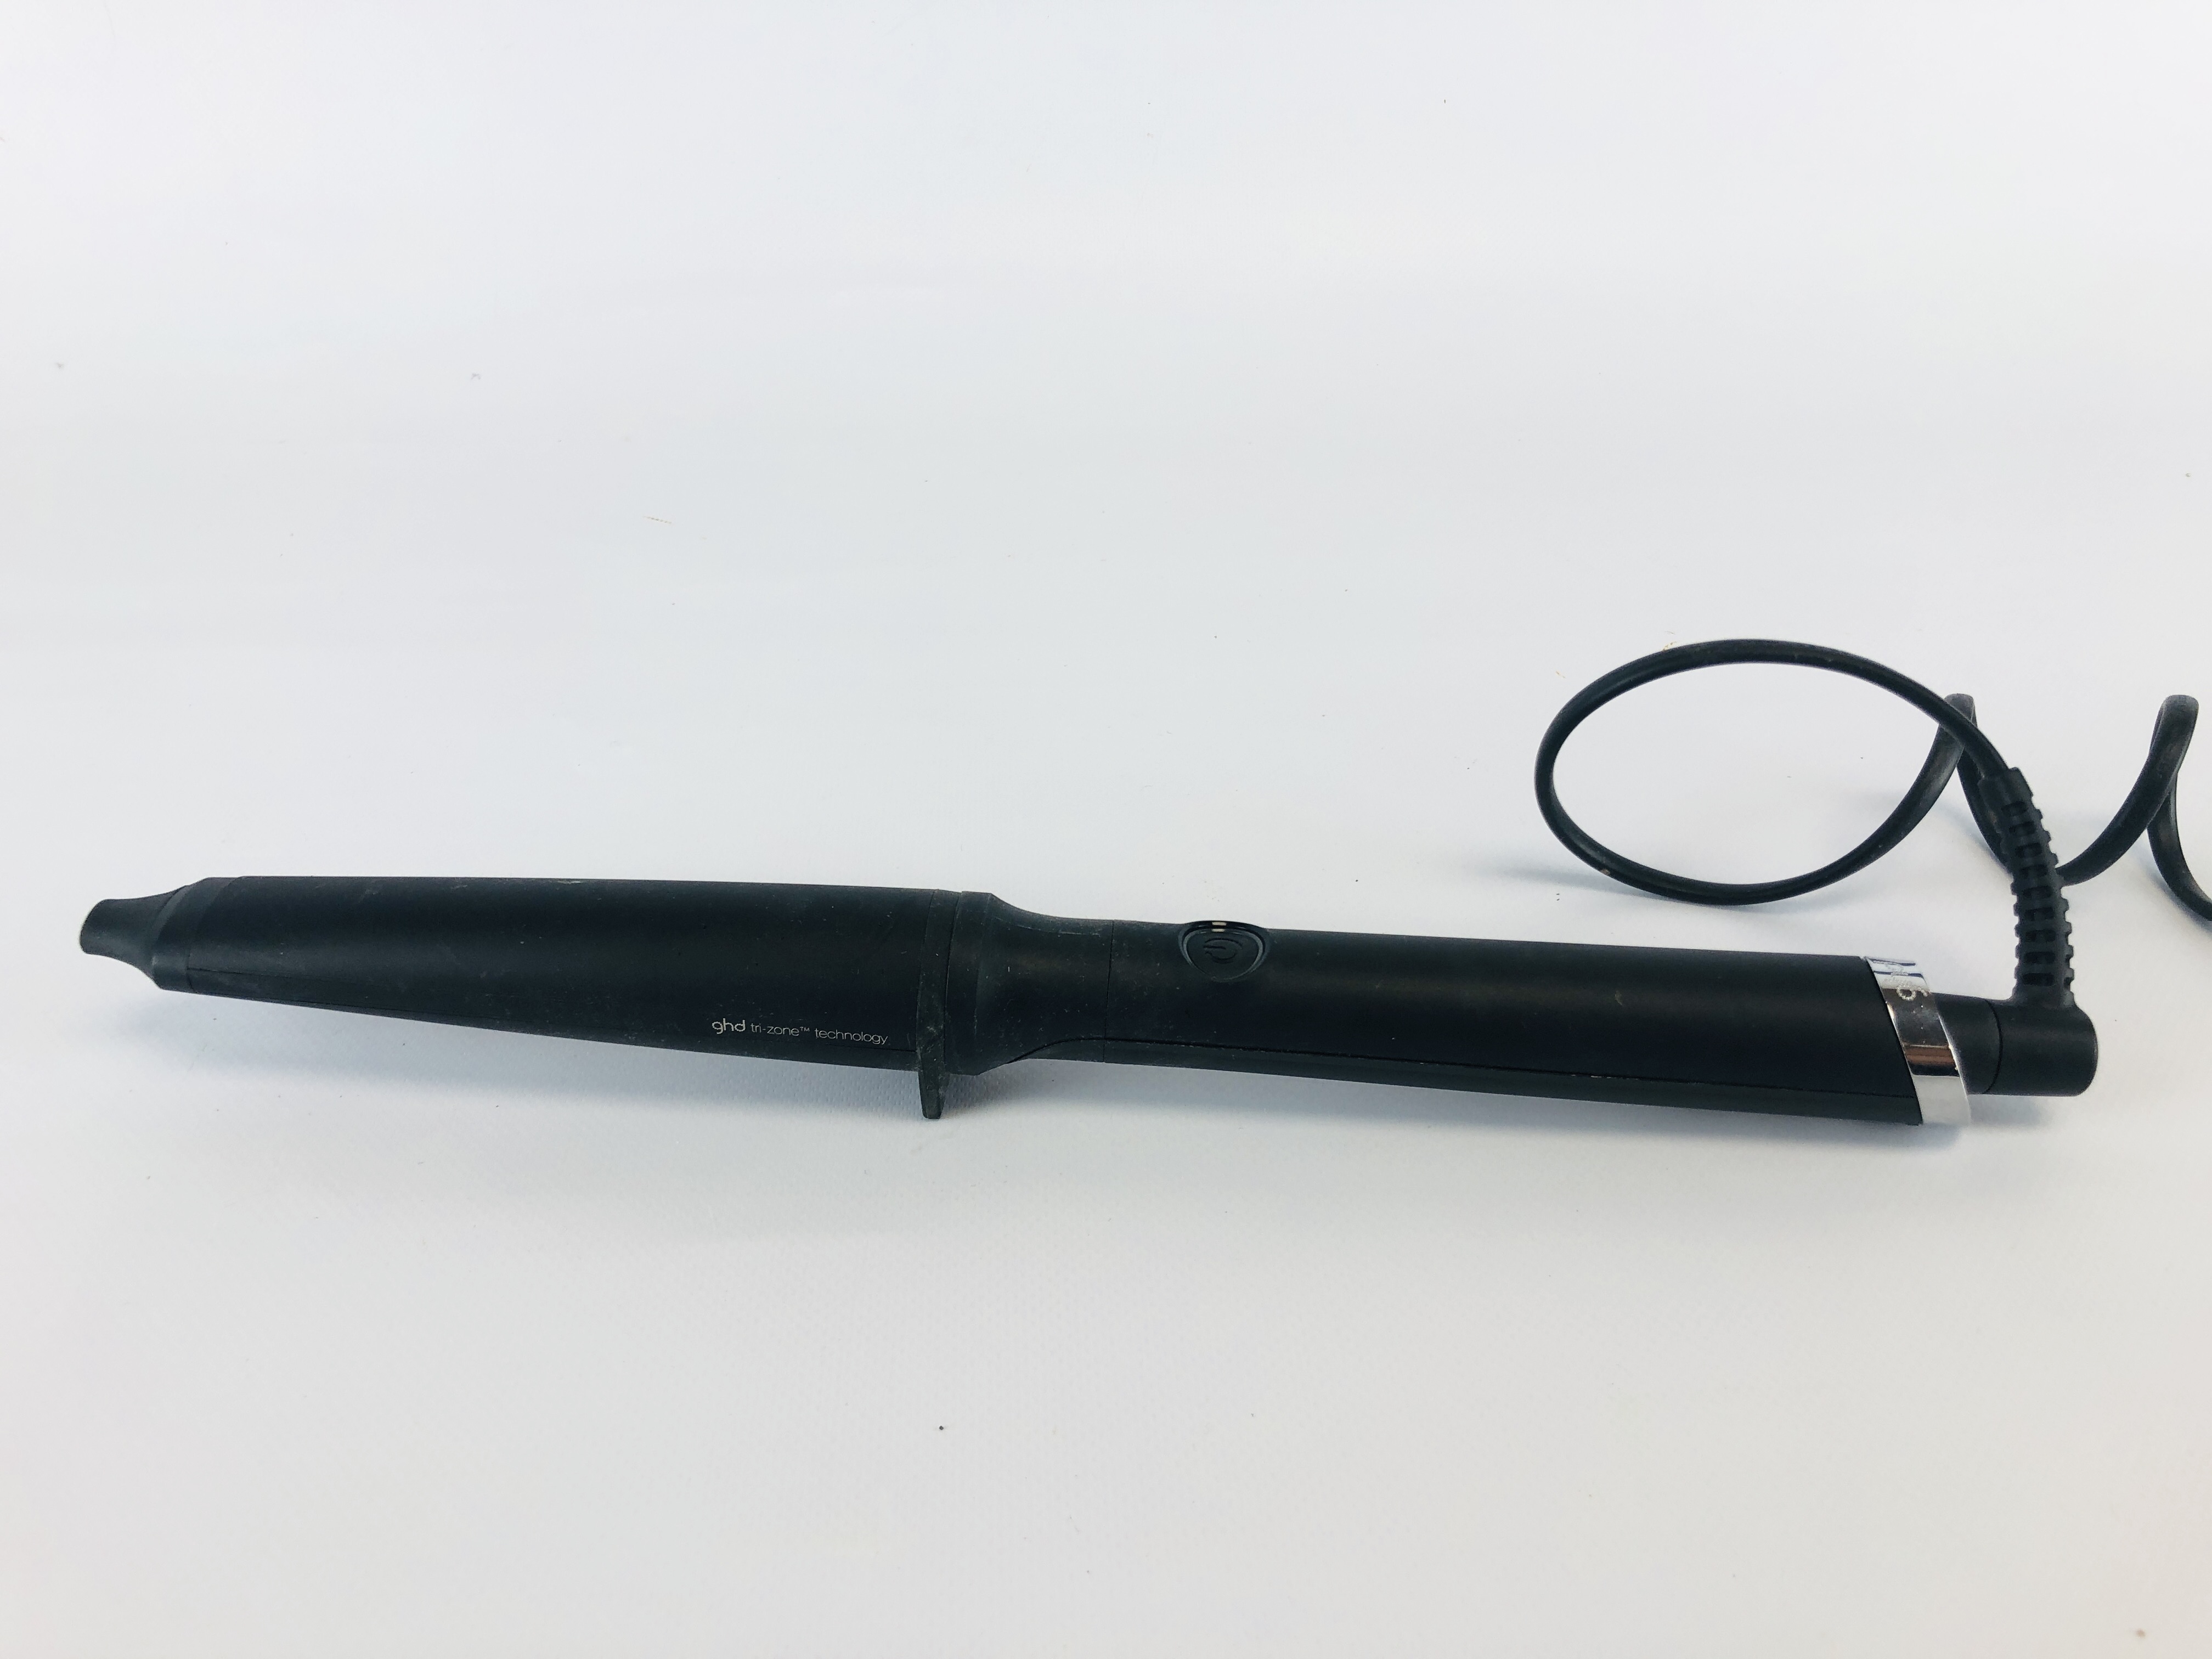 A CURLING WAND MARKED GHD MODEL NO. CTWA21 - SOLD AS SEEN.